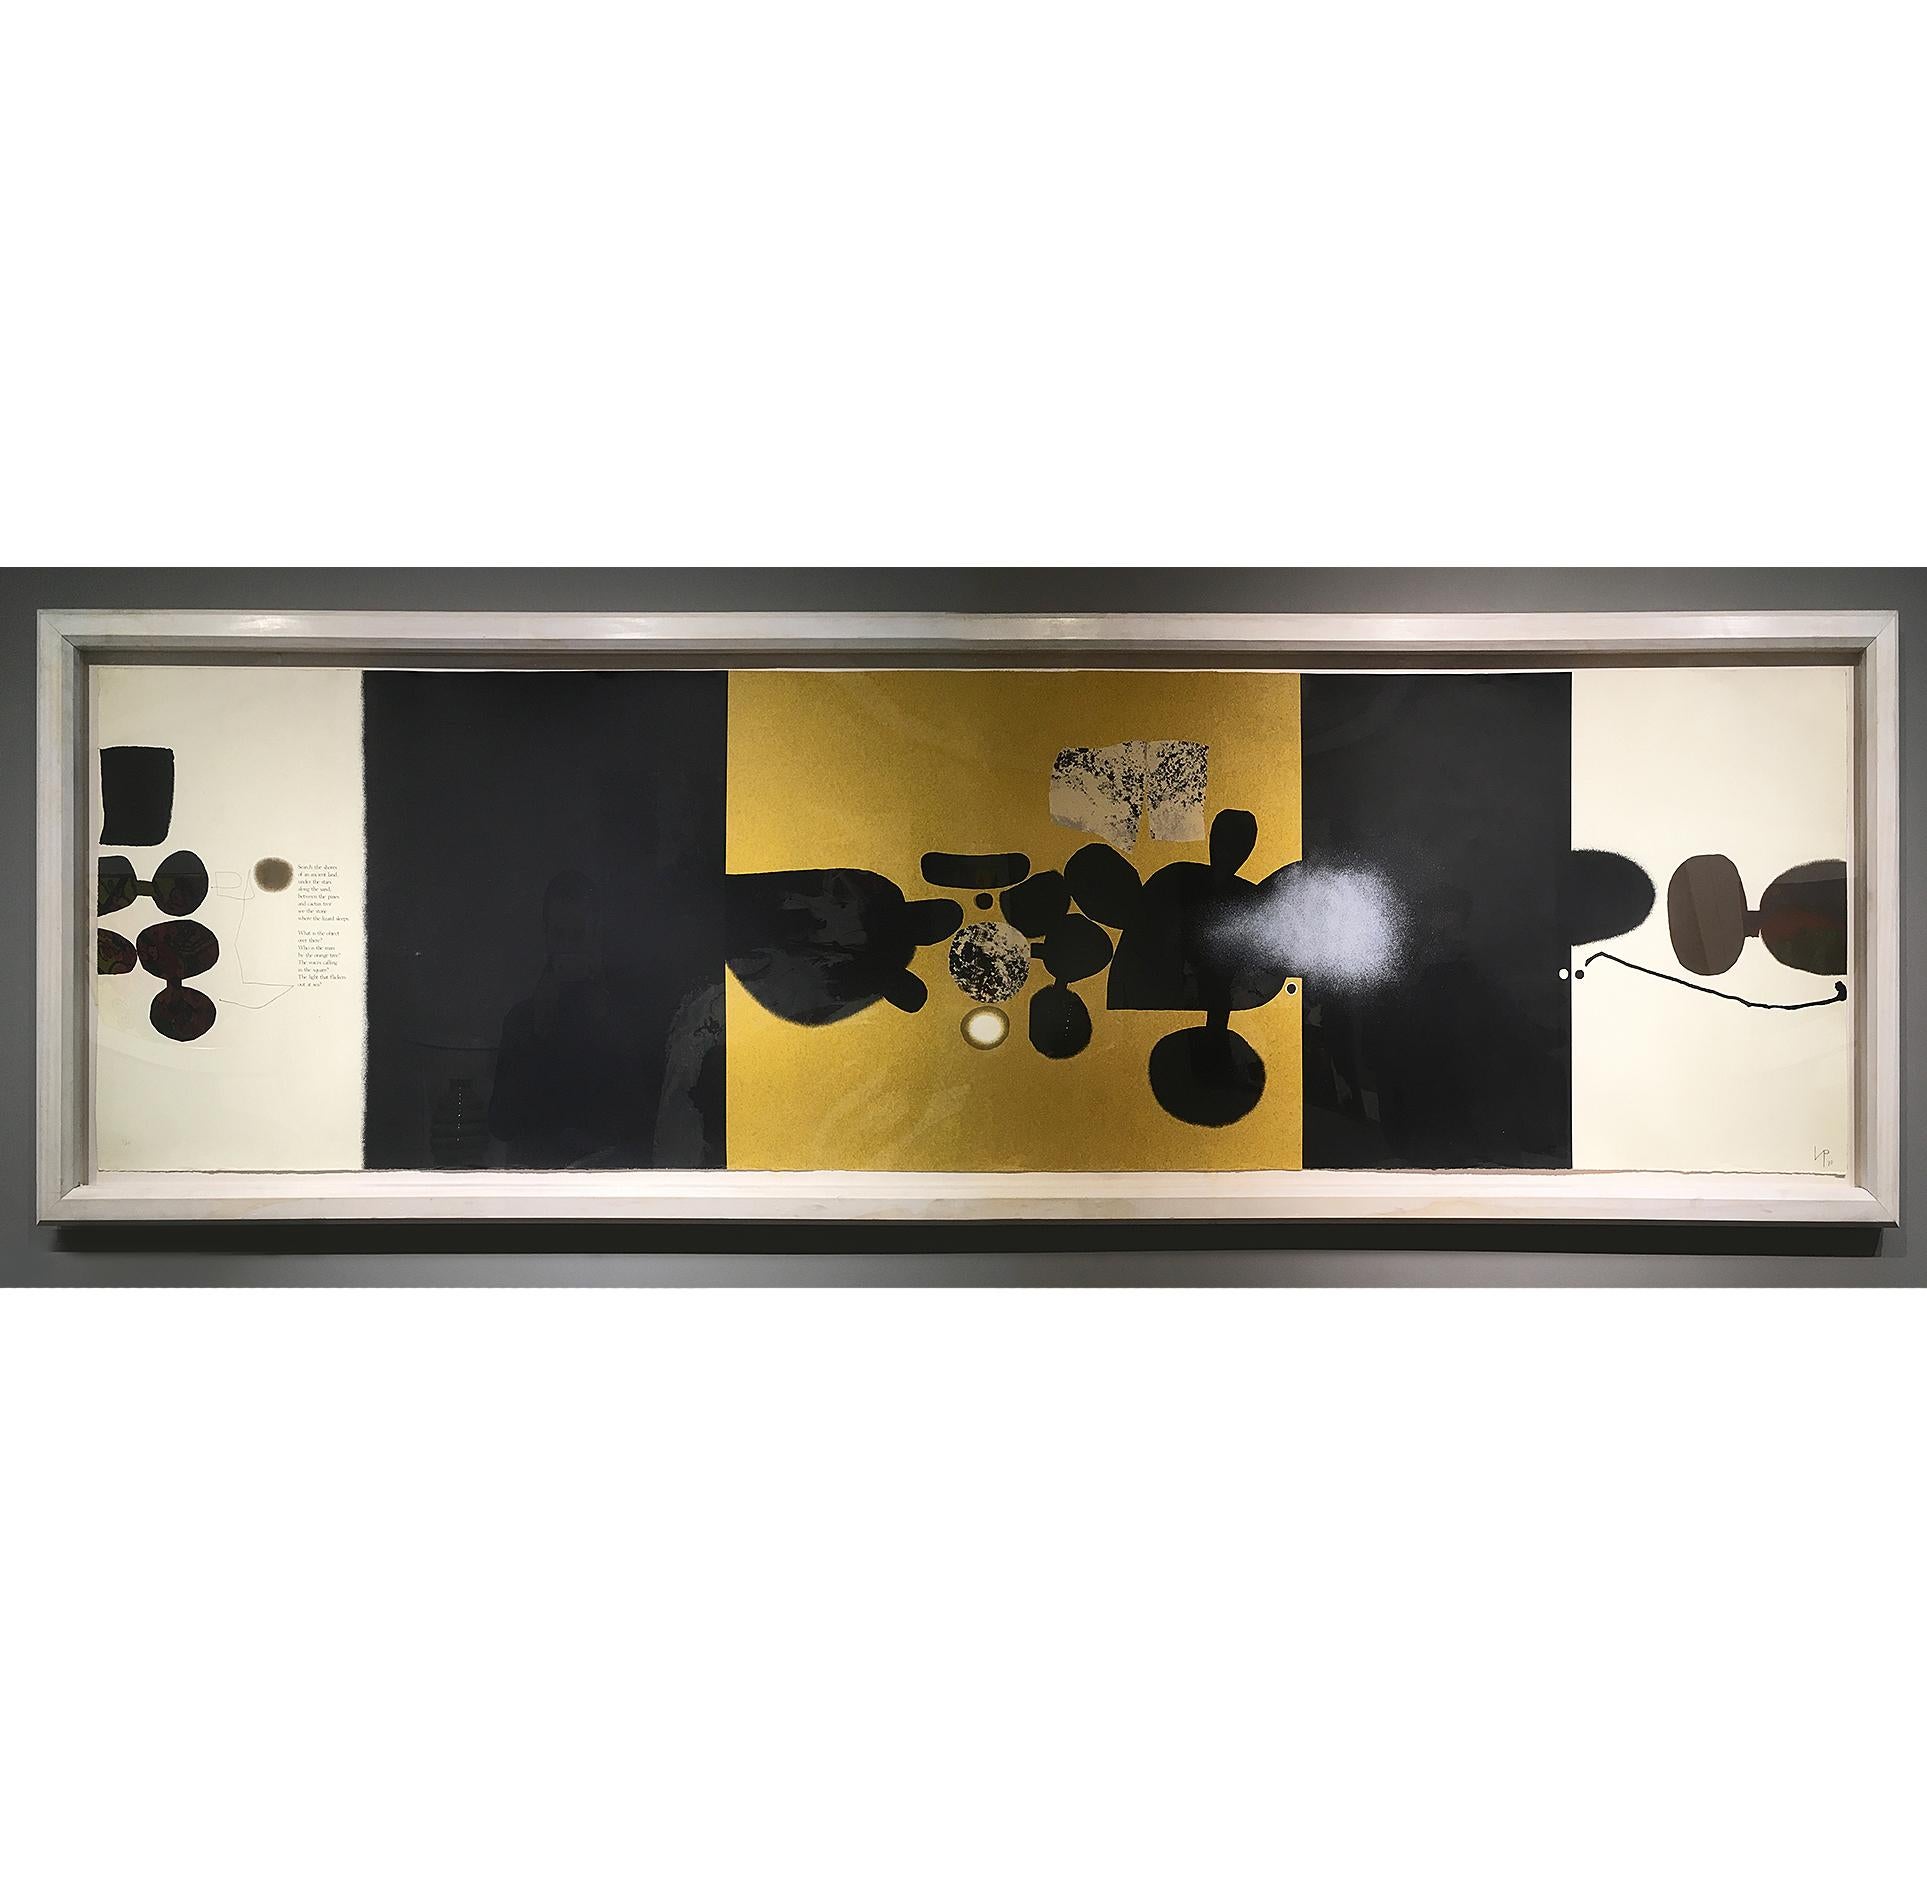 What is the Object over there? Points of Contact No. 17, 1973 by Victor Pasmore (British, 1908-1998). Multiple colour screen prints on paper. Signed, numbered and dated.

Frame: 304W x 91H cm
Print: 289W x 76H cm

Limited Edition of 25. Numbered 1/25